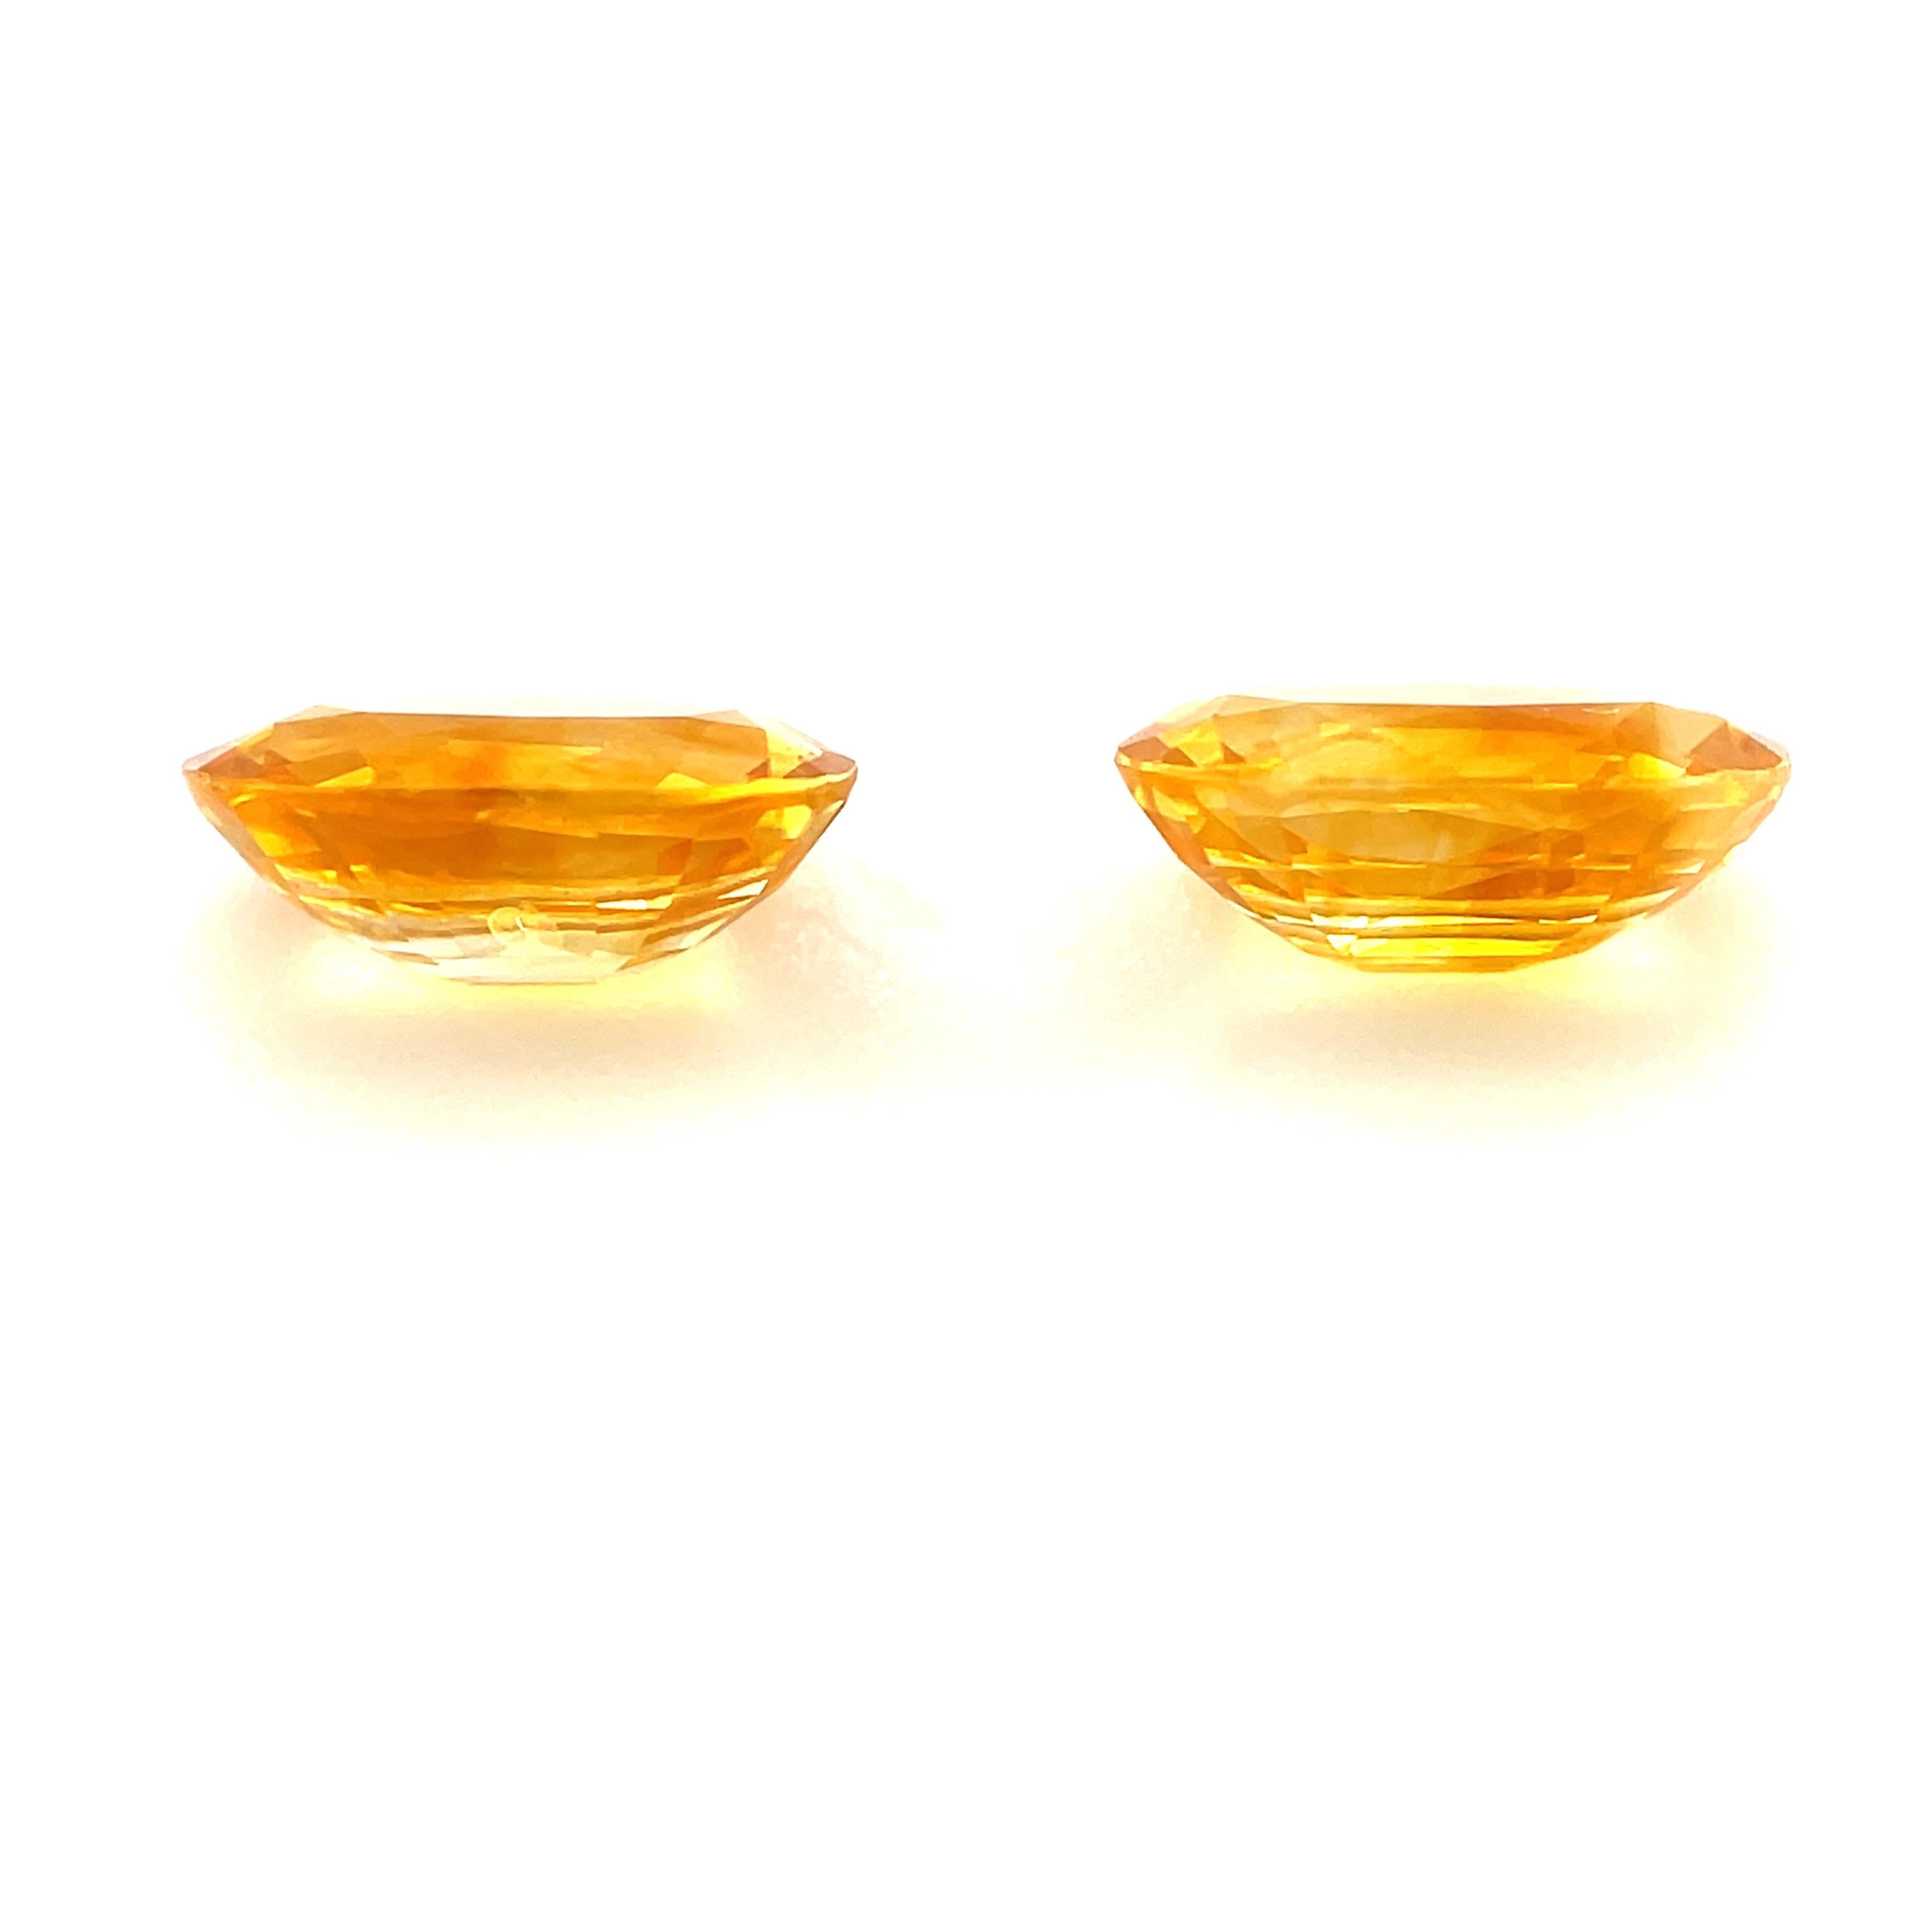 Oval Cut 1.92 Carat Total Oval Yellow Sapphire Pair for Earrings, Loose Gemstones For Sale